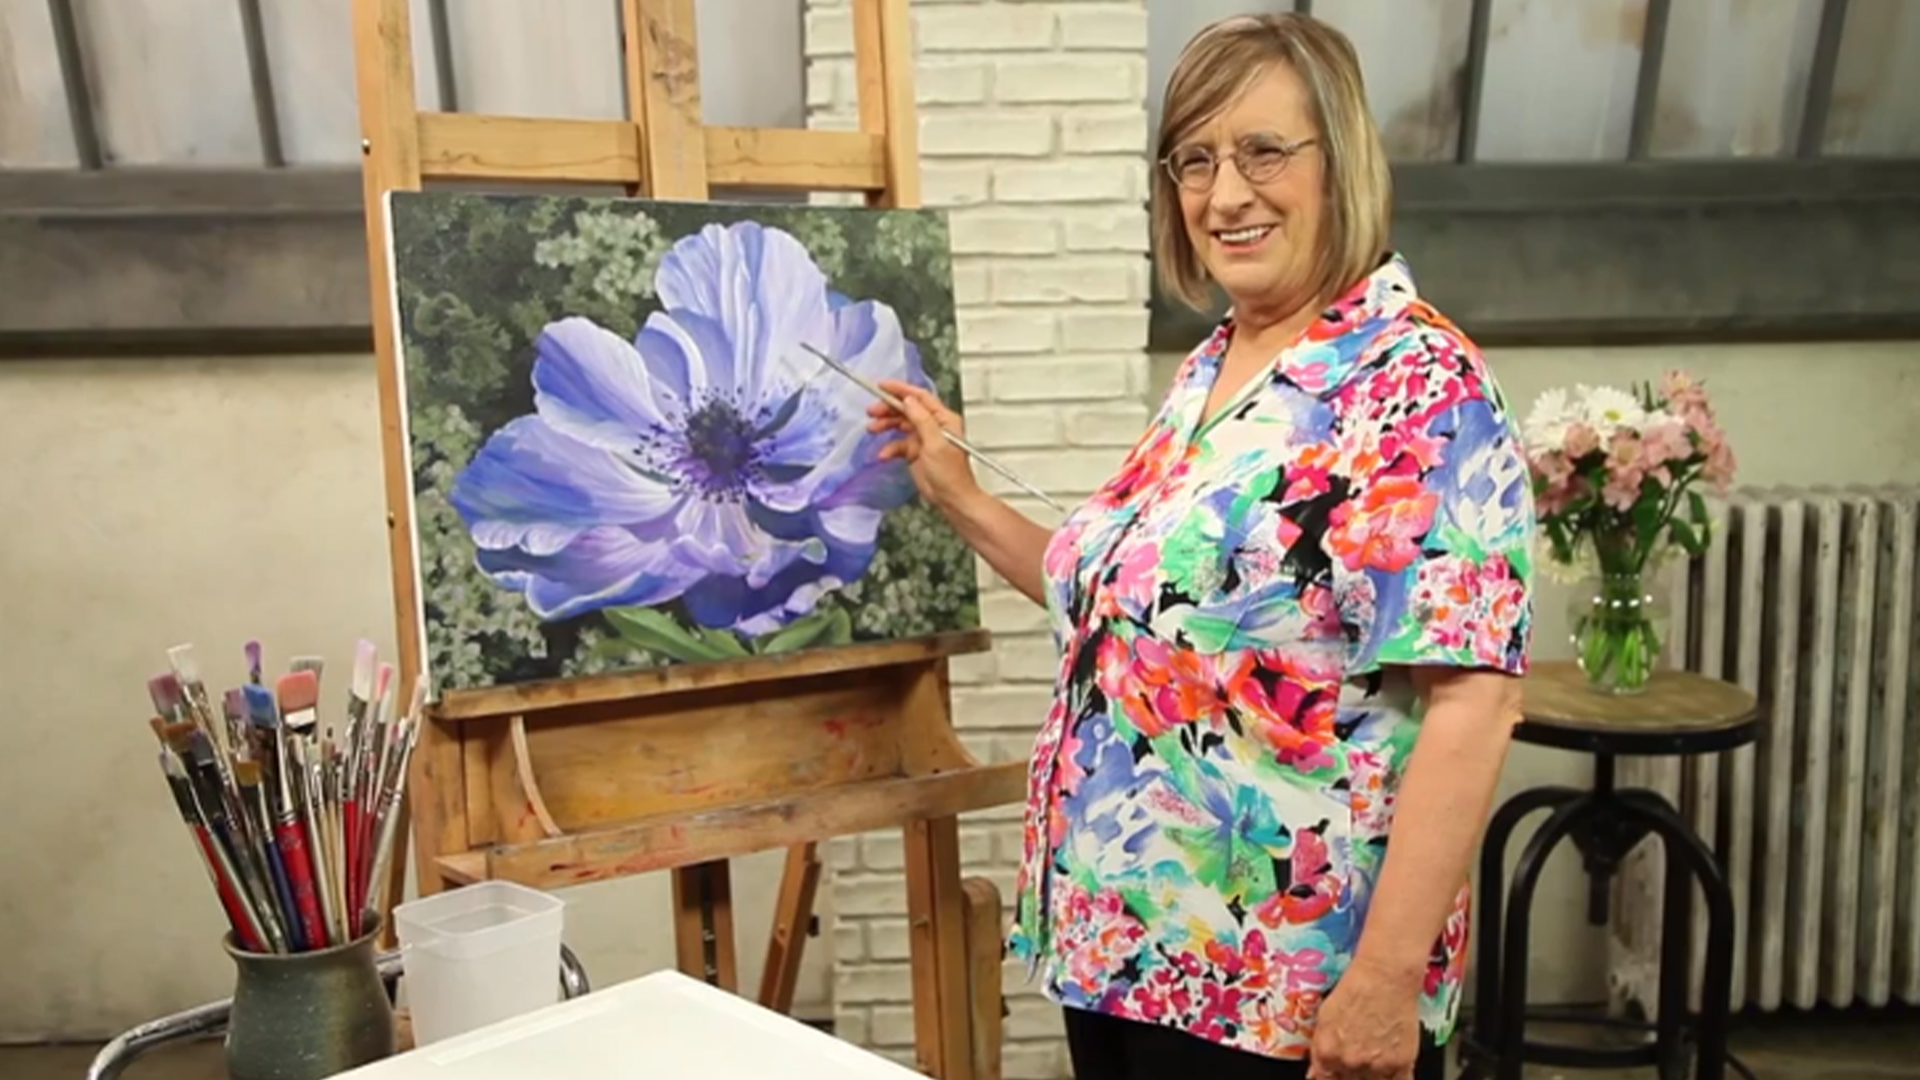 Learn to watercolor an Anemone Flower with Kristy Rice 